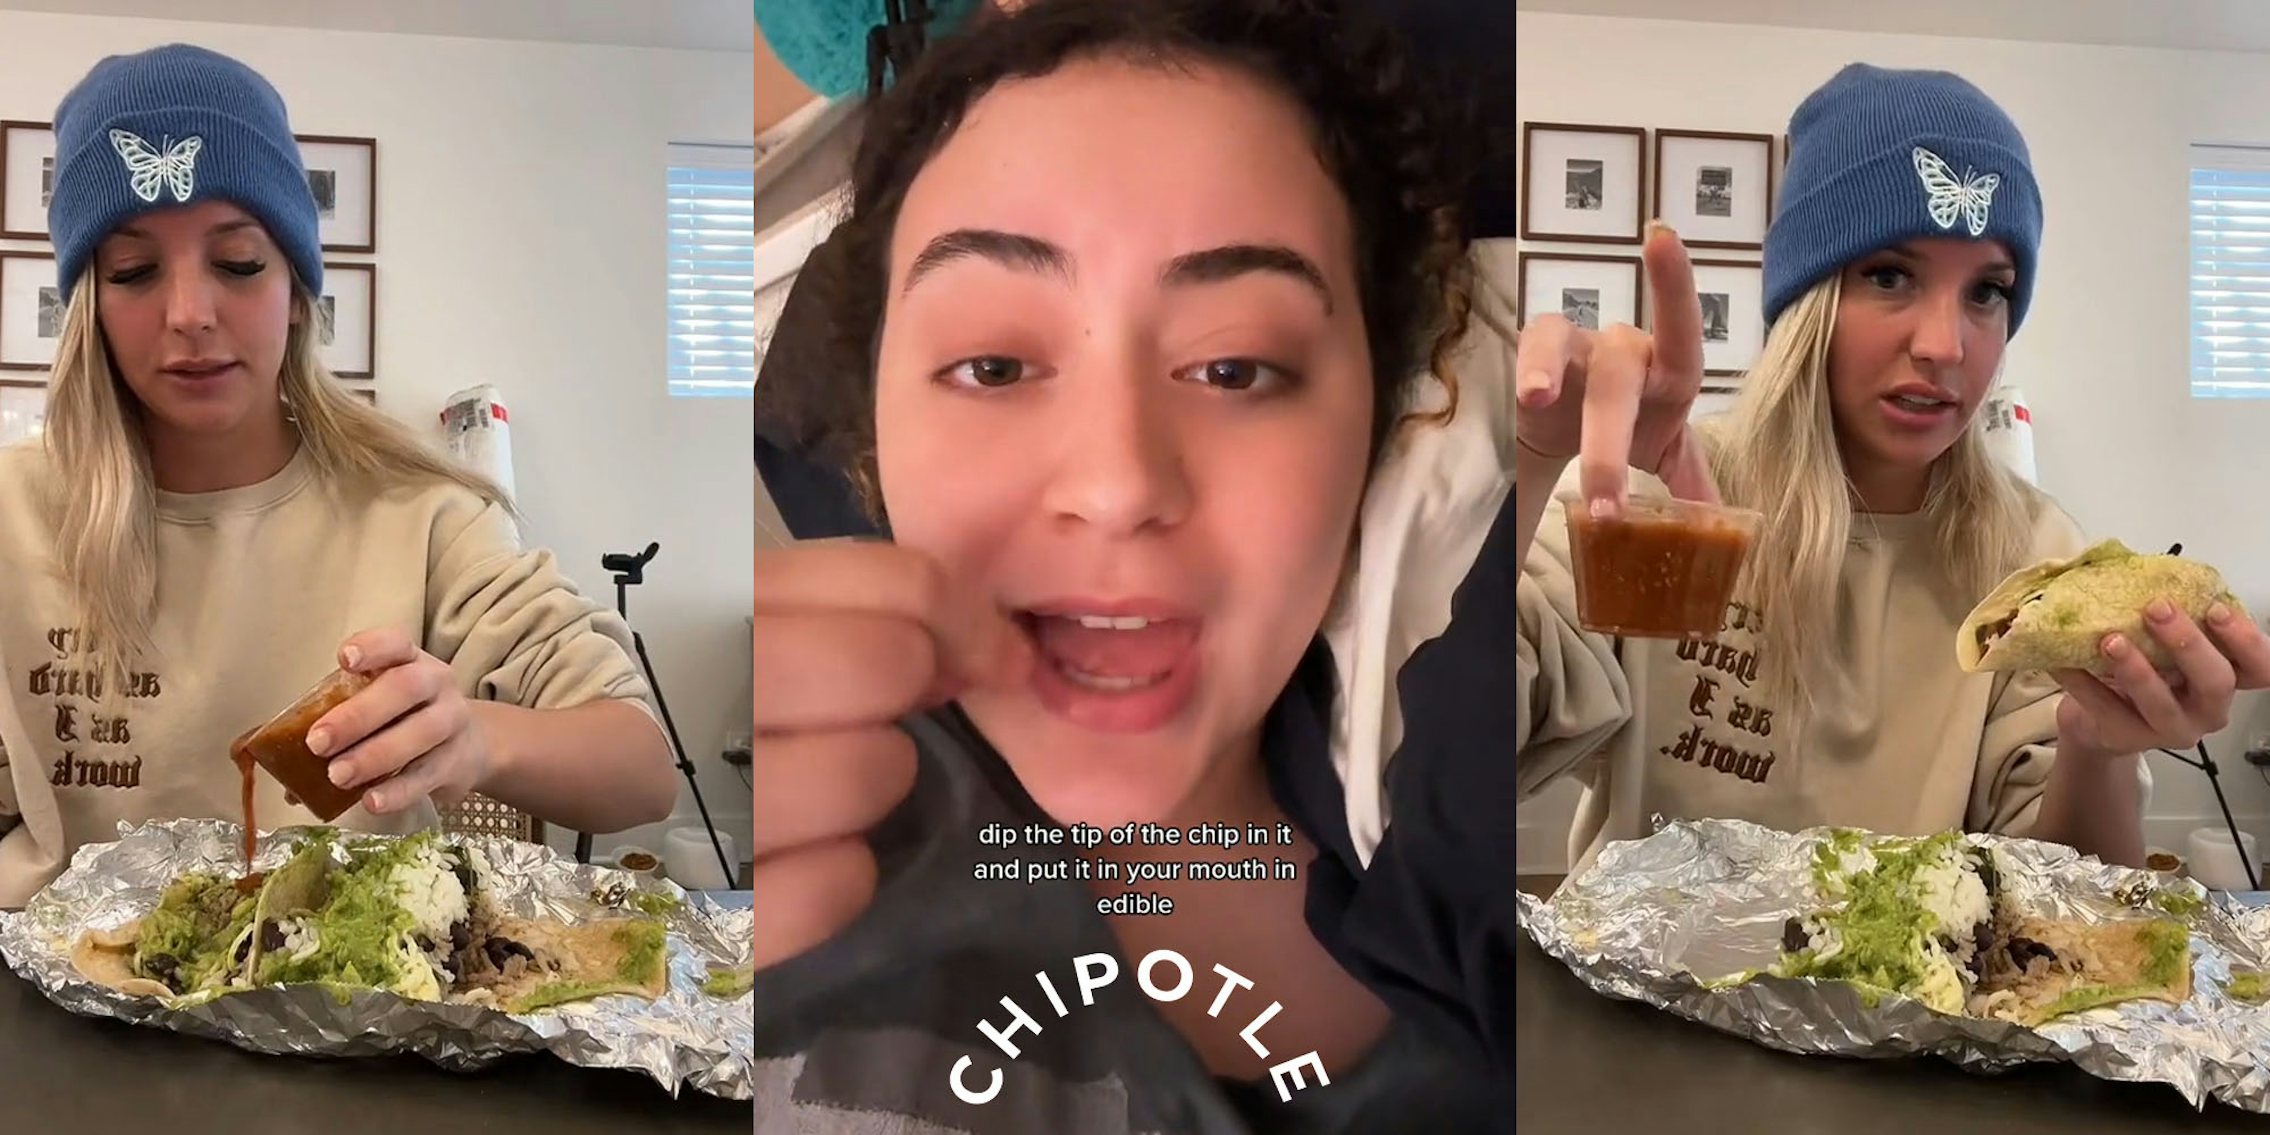 woman pouring Chipotle red sauce on food (l) woman speaking with Chipotle logo centered at bottom caption 'dip the tip of the chip in it and put it in your mouth in edible (c) woman holding Chipotle red sauce and food (r)